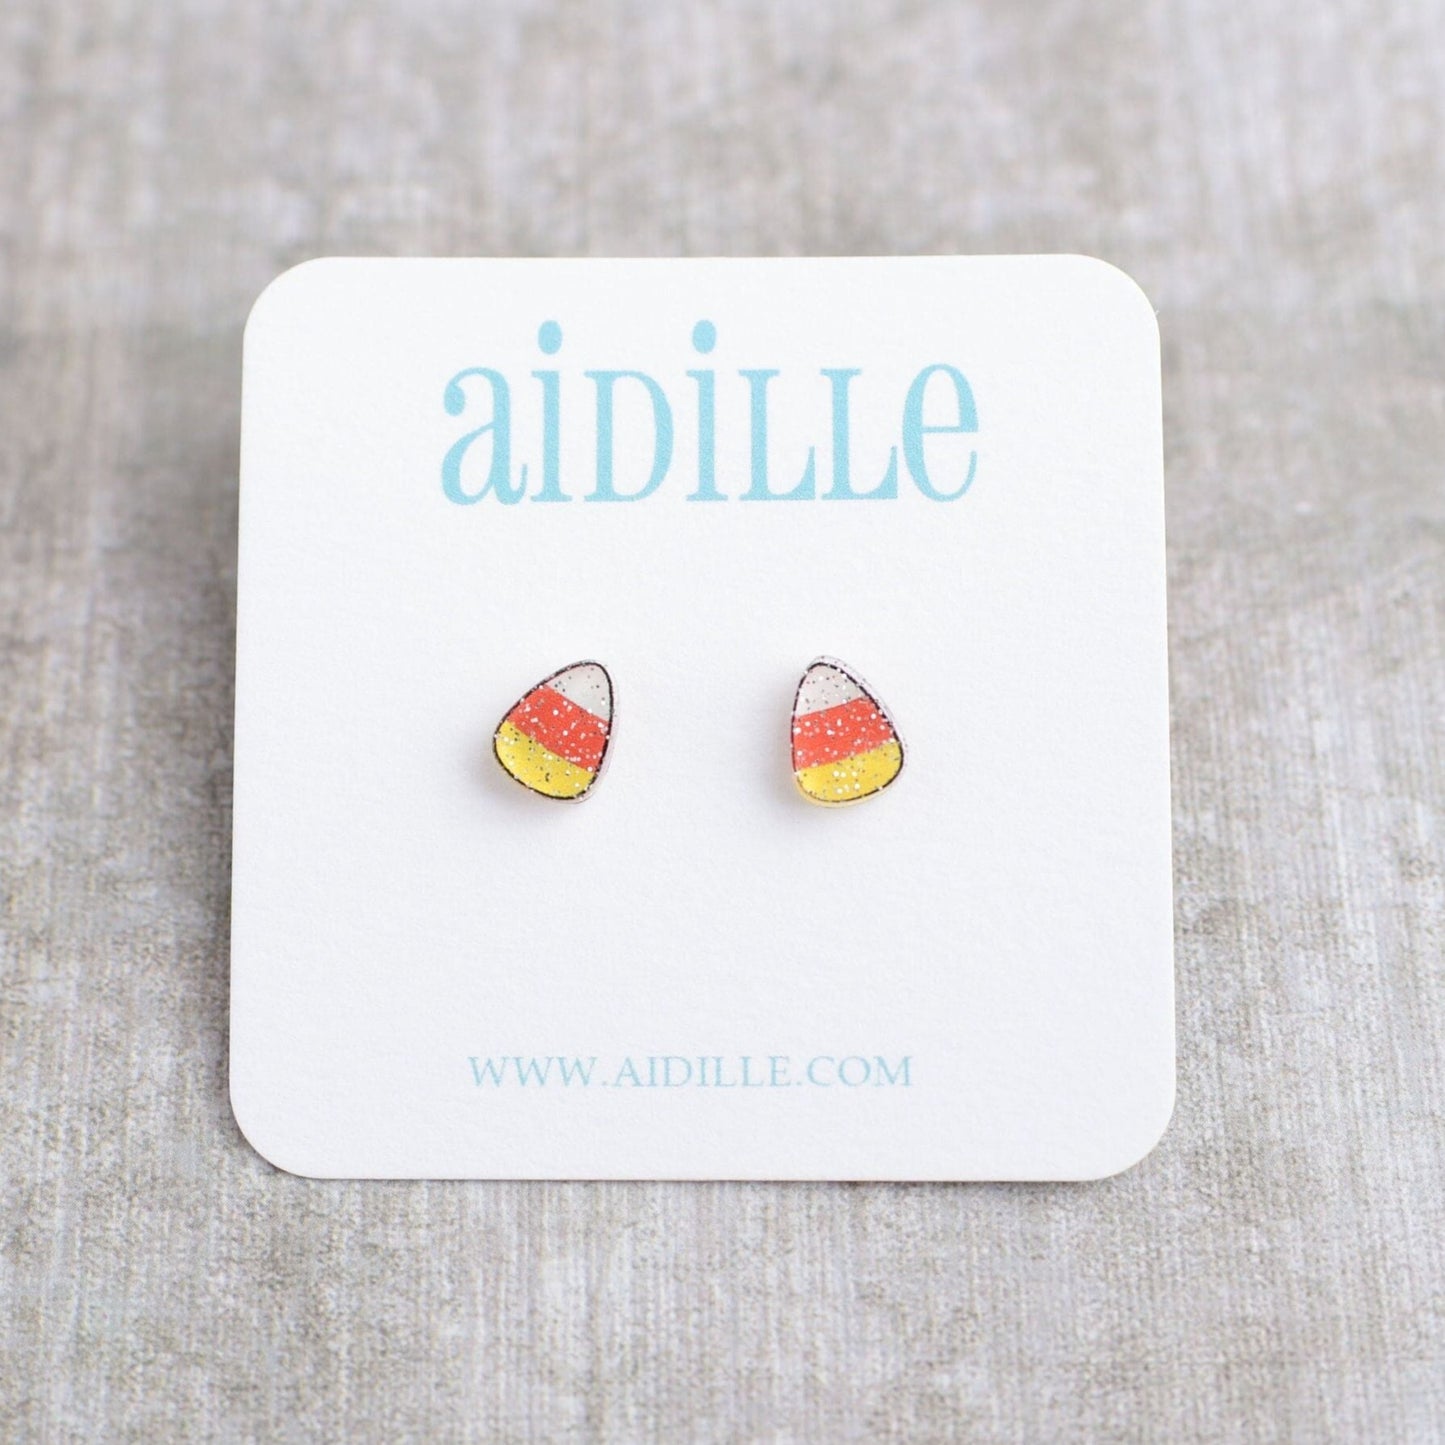 Candy Corn Earrings with Titanium Posts